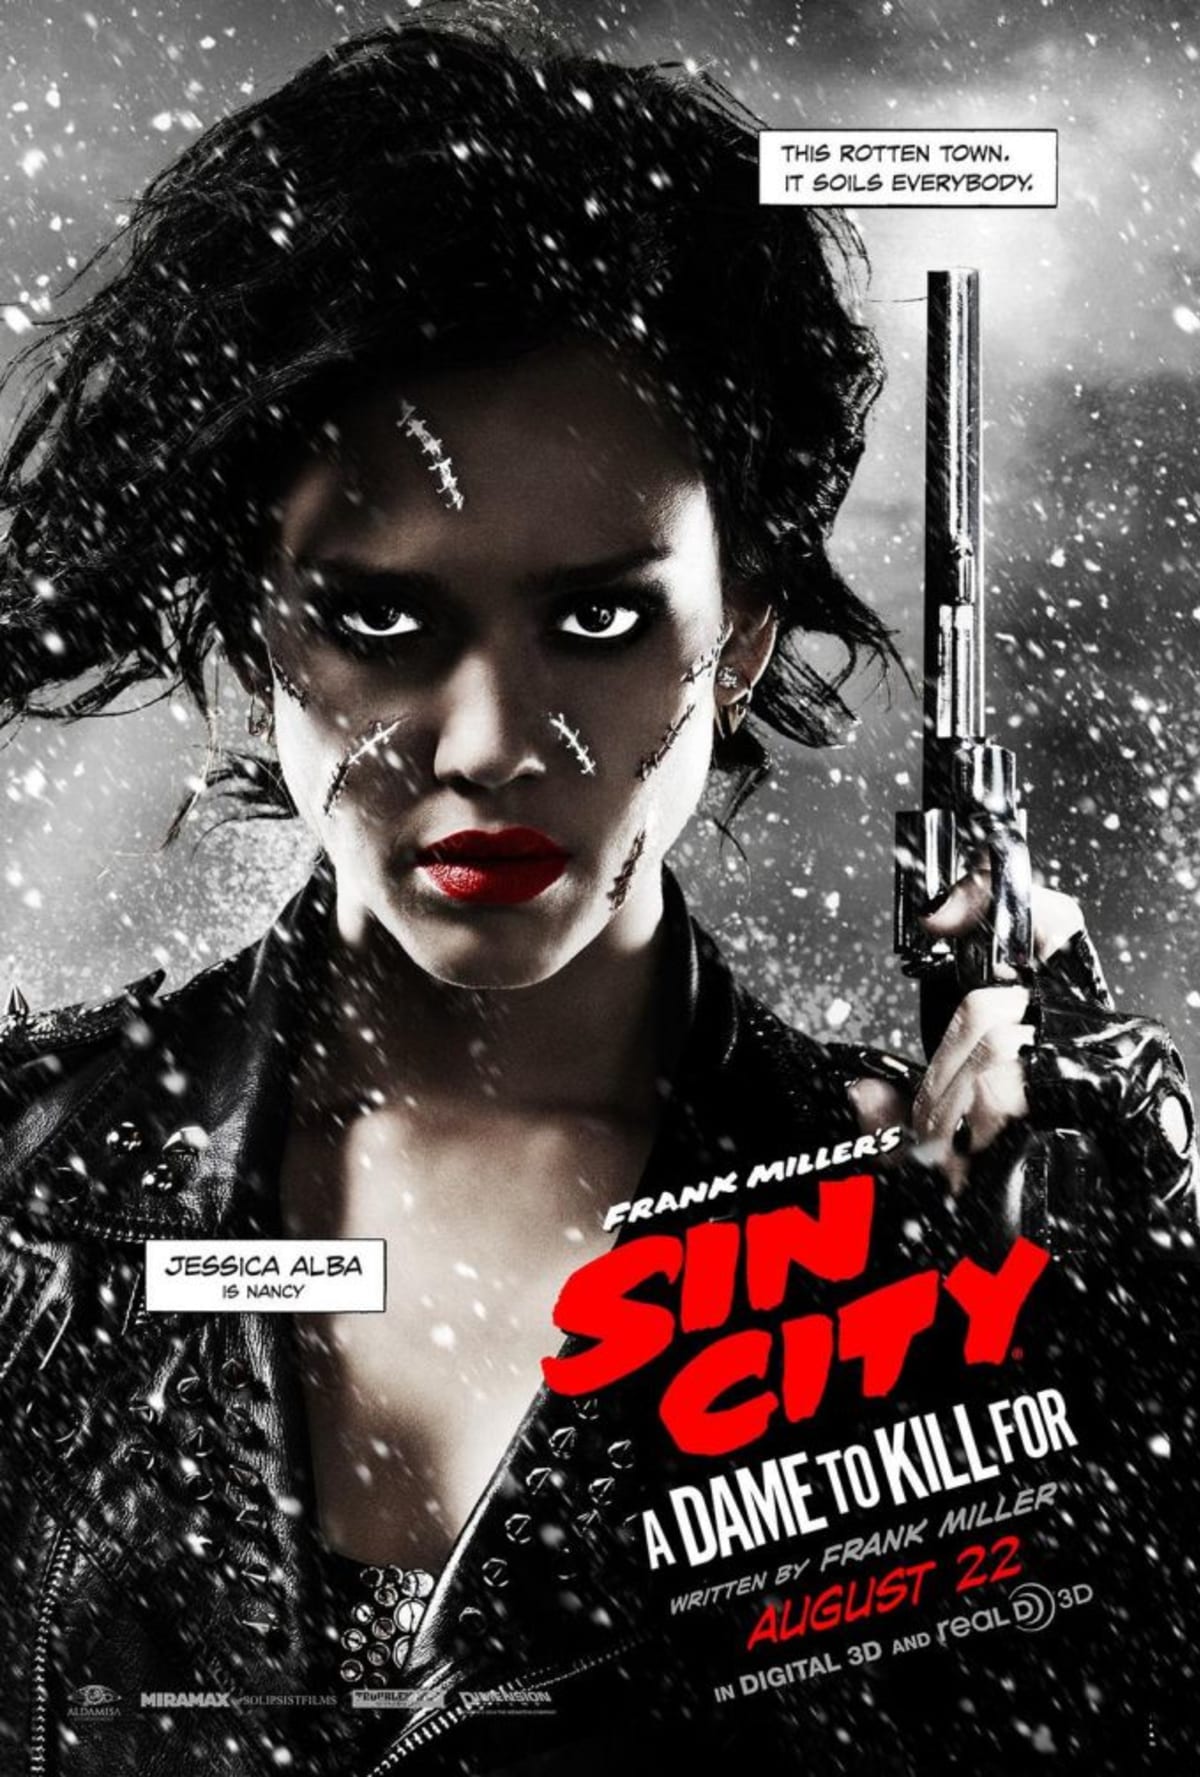 Jessica Alba is Very Intimidating in the New Sin City Poster Complex